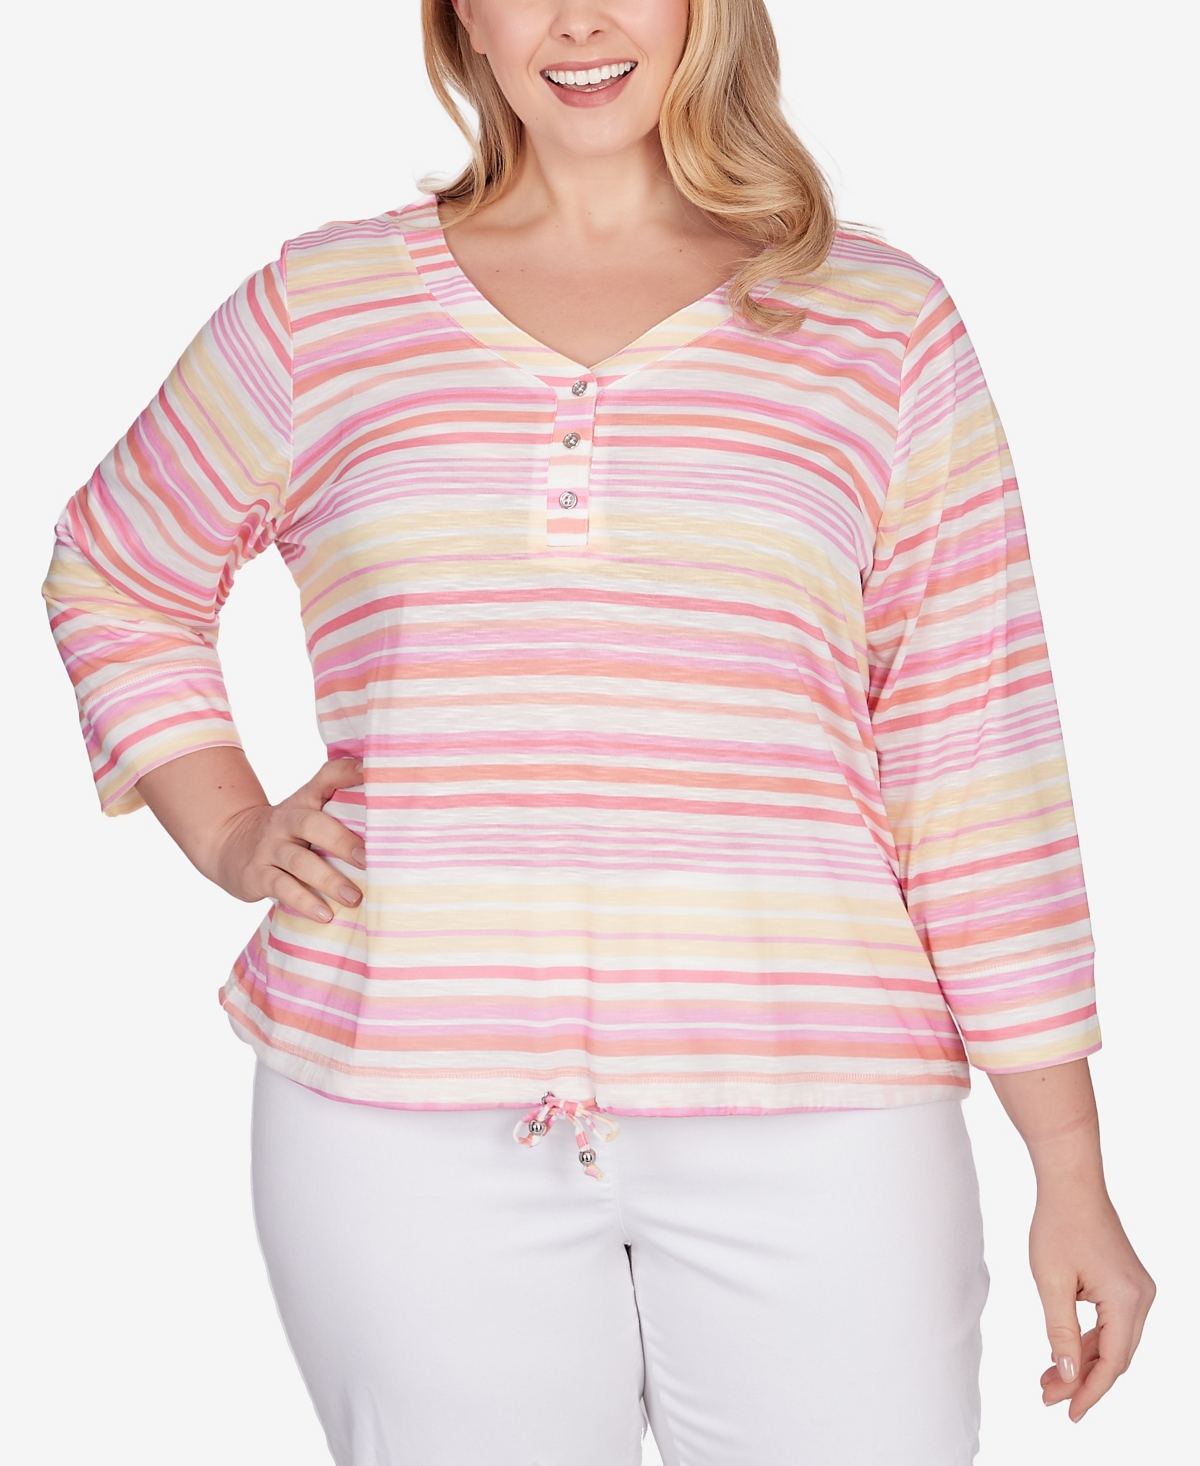 Plus Size Spring Into Action 3/4 Sleeve Top - Orchid Multi